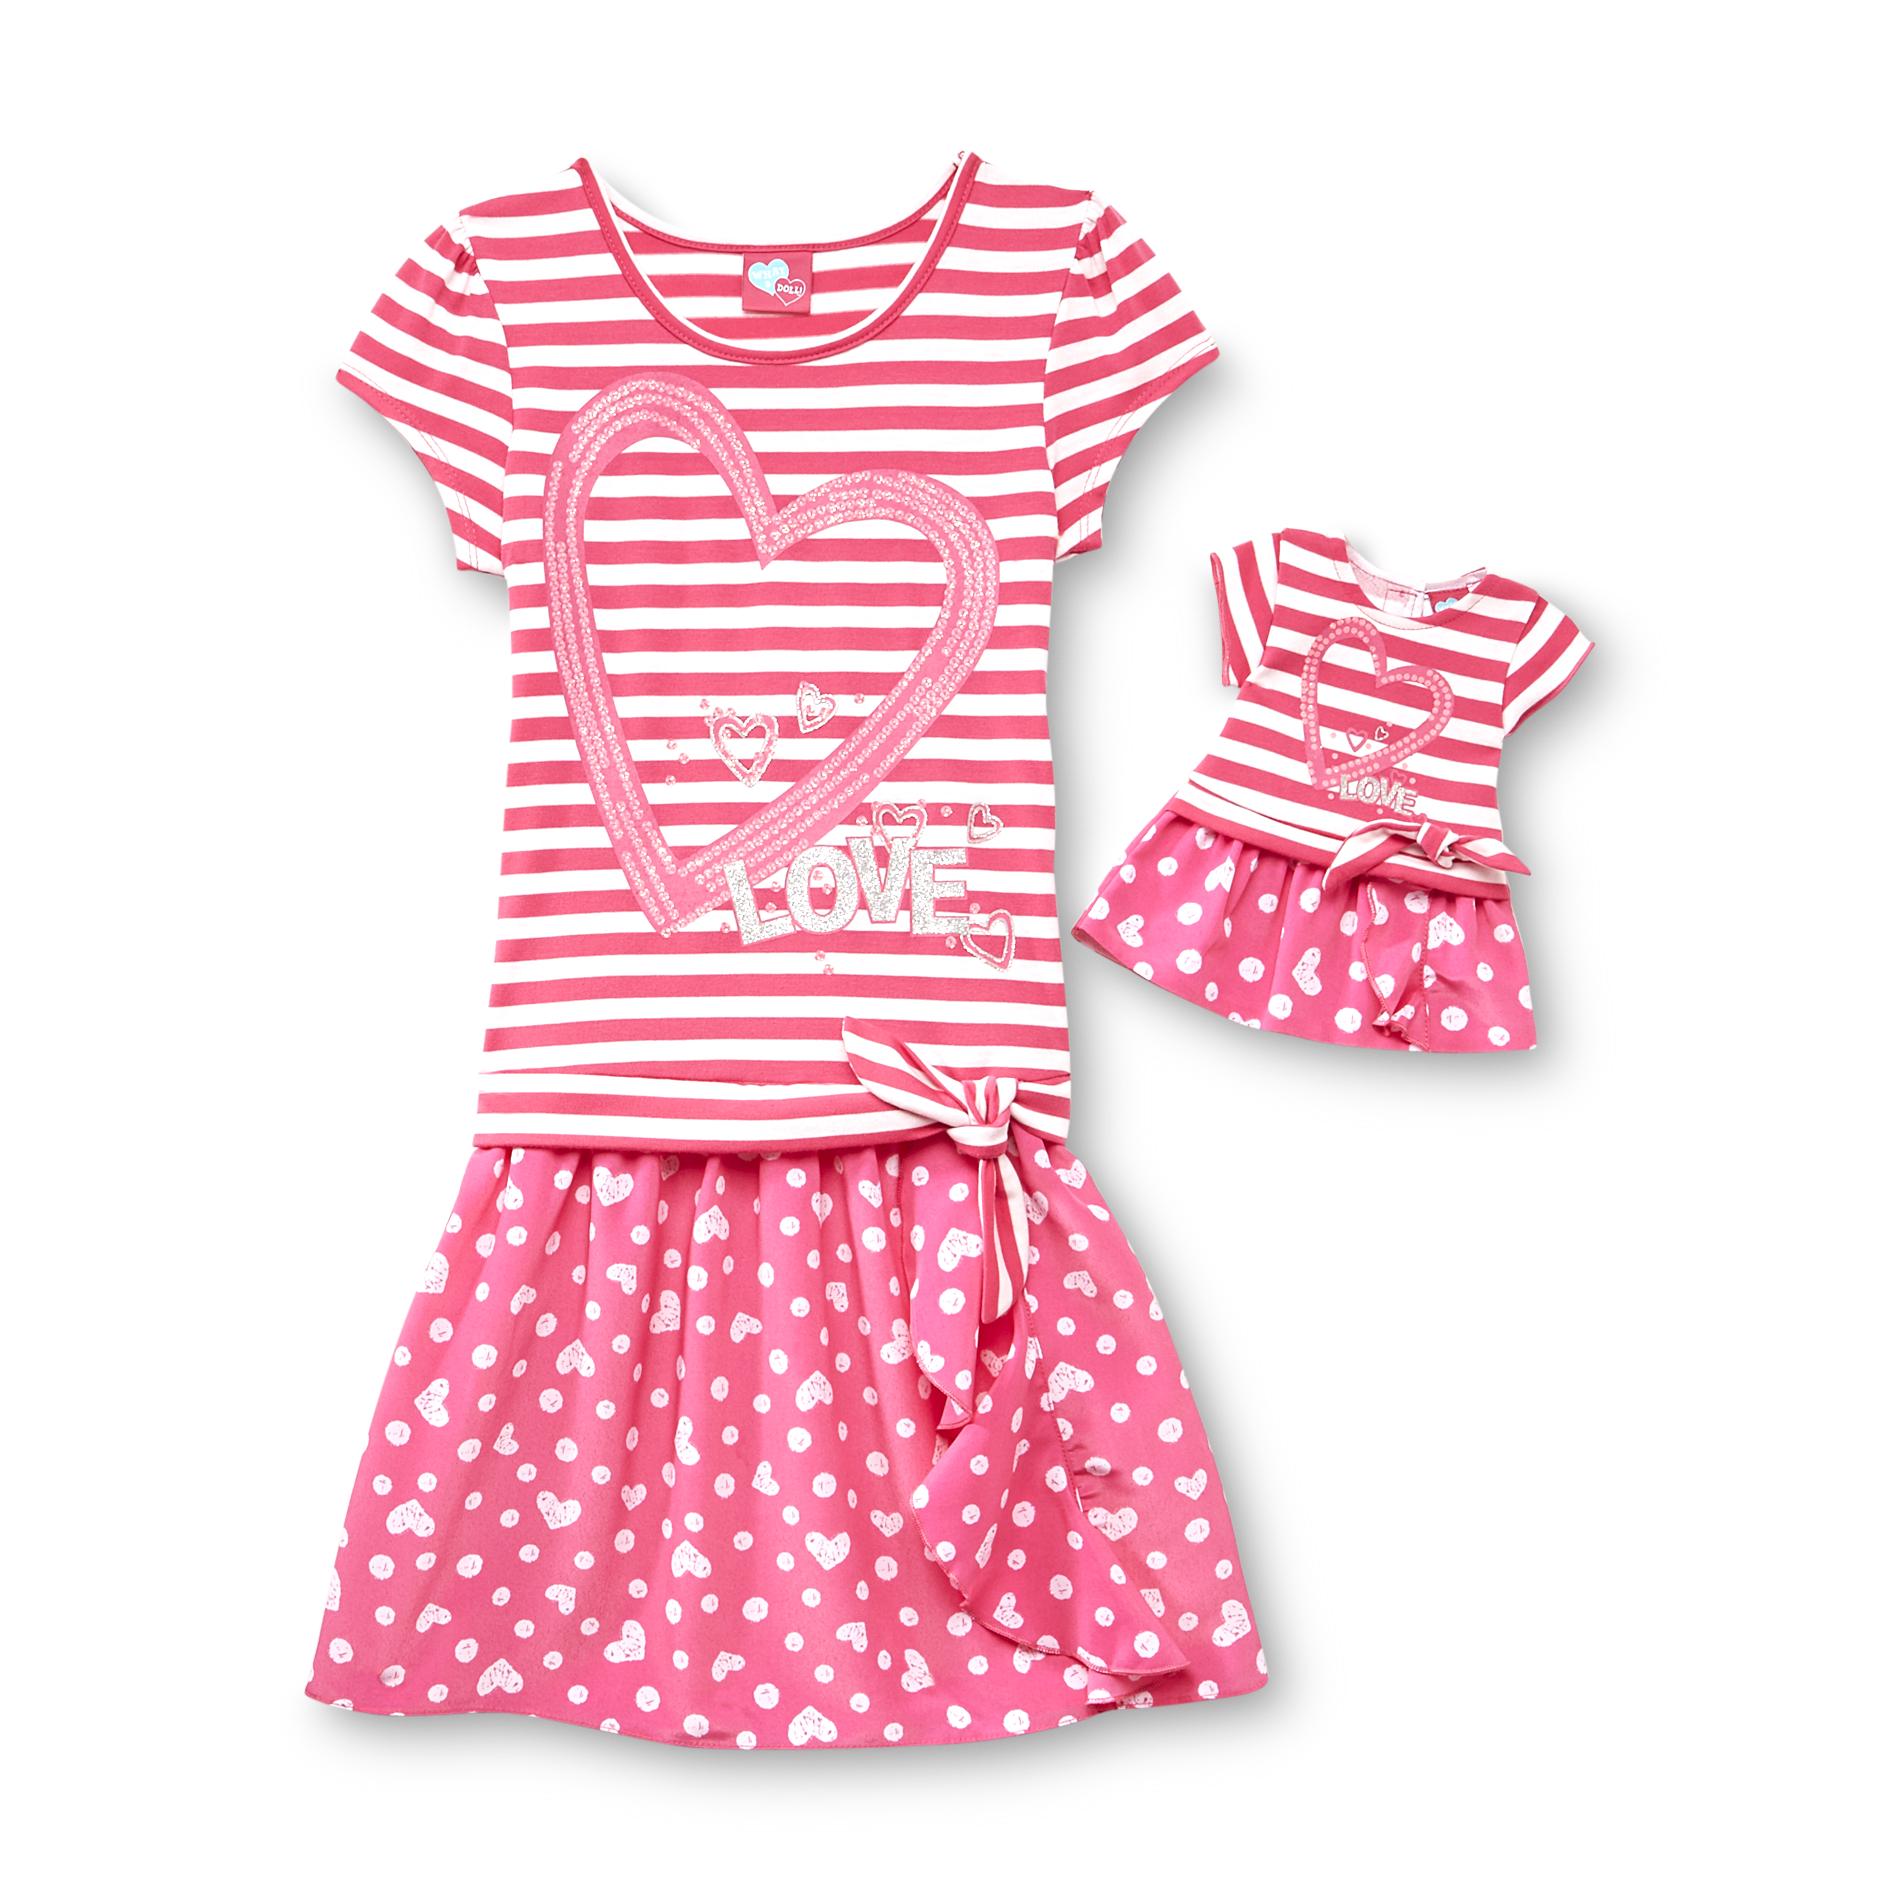 What A Doll Girl's Drop-Waist Dress & Doll Outfit - Stripe  Hearts & Love